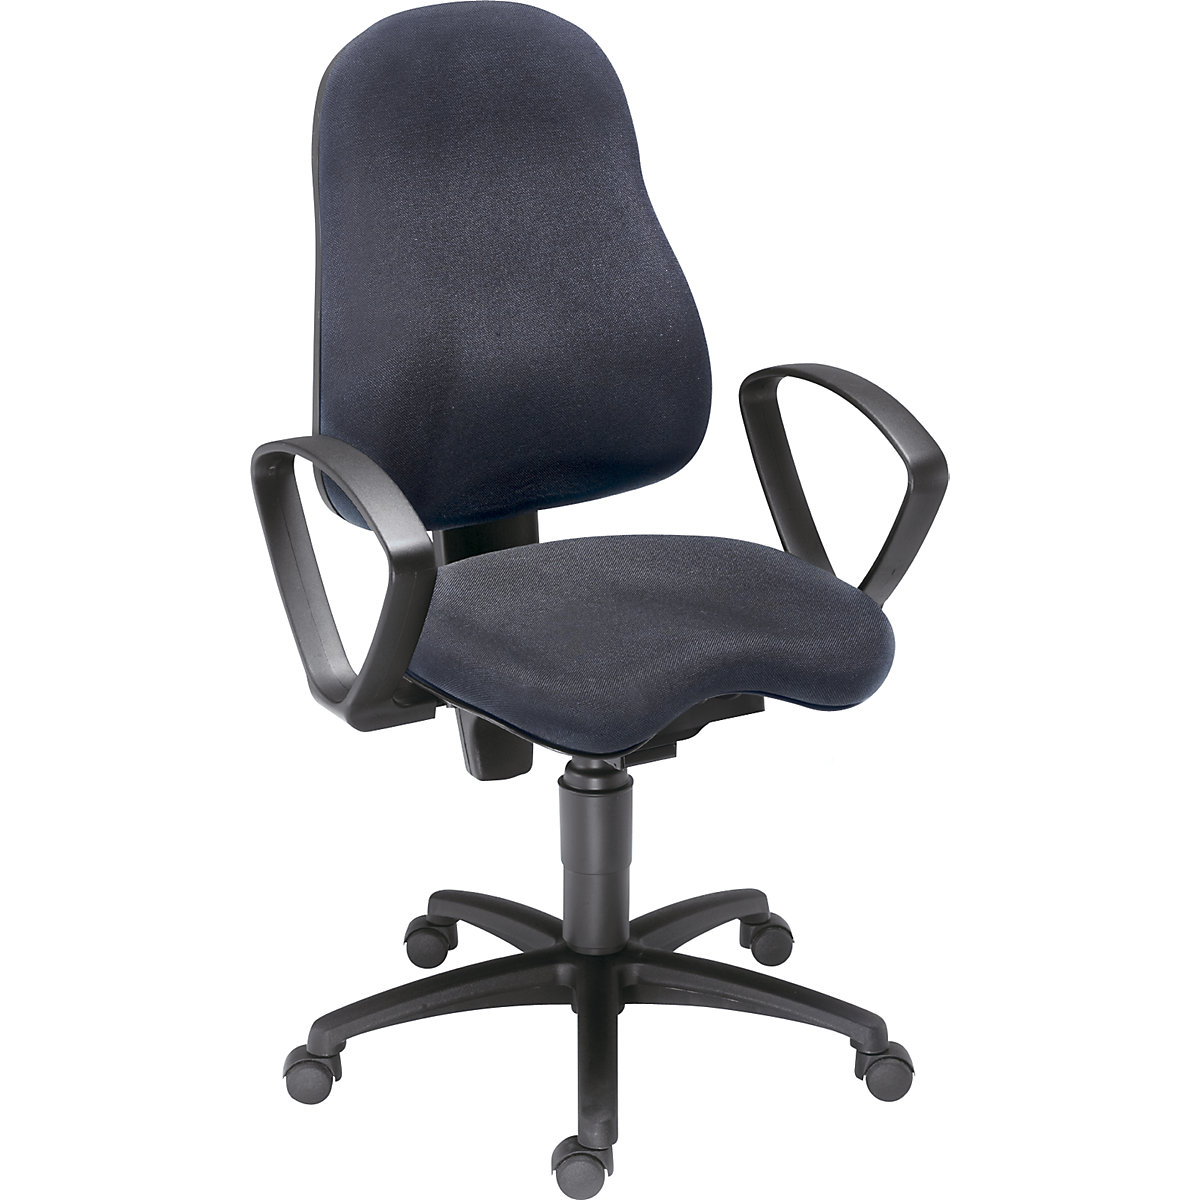 BALANCE 400 operator swivel chair – Topstar, with Body Balance Tec®, incl. arm rests, black covering-3